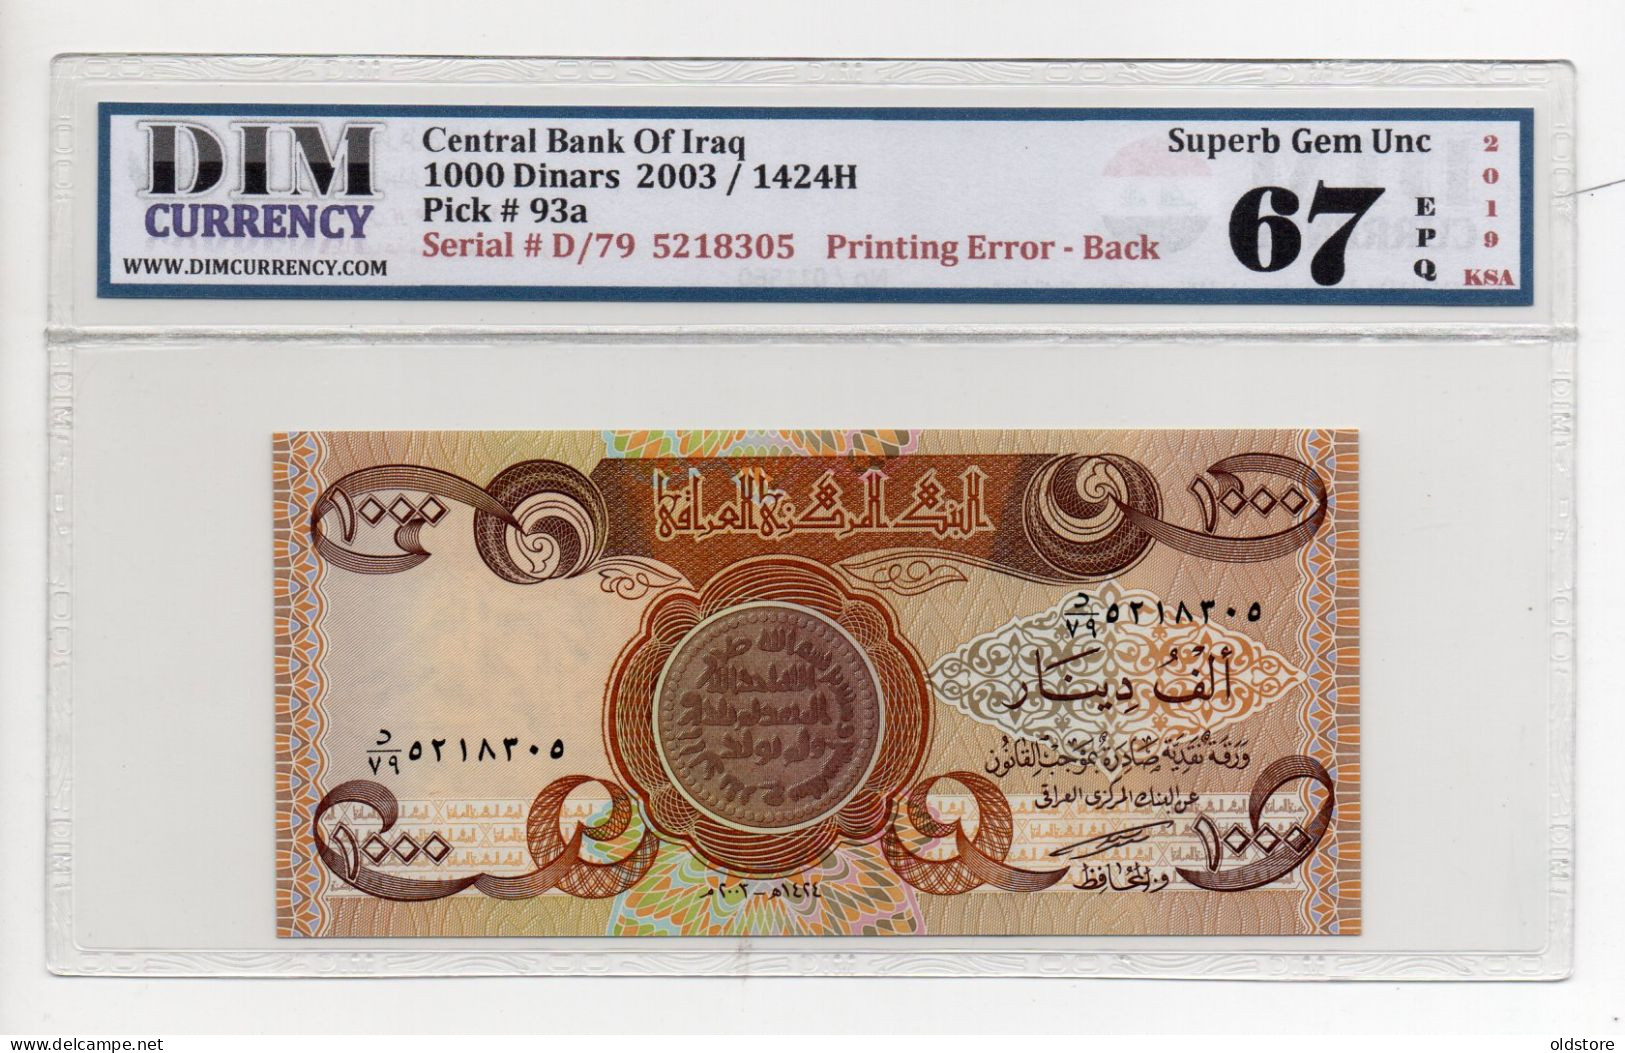 Iraq Banknotes 1000 Dinars - Very Rare ERROR Background Is A Different Color - ND 2003 - Grade By DIM Superb UNC 67 EPQ - Iraq